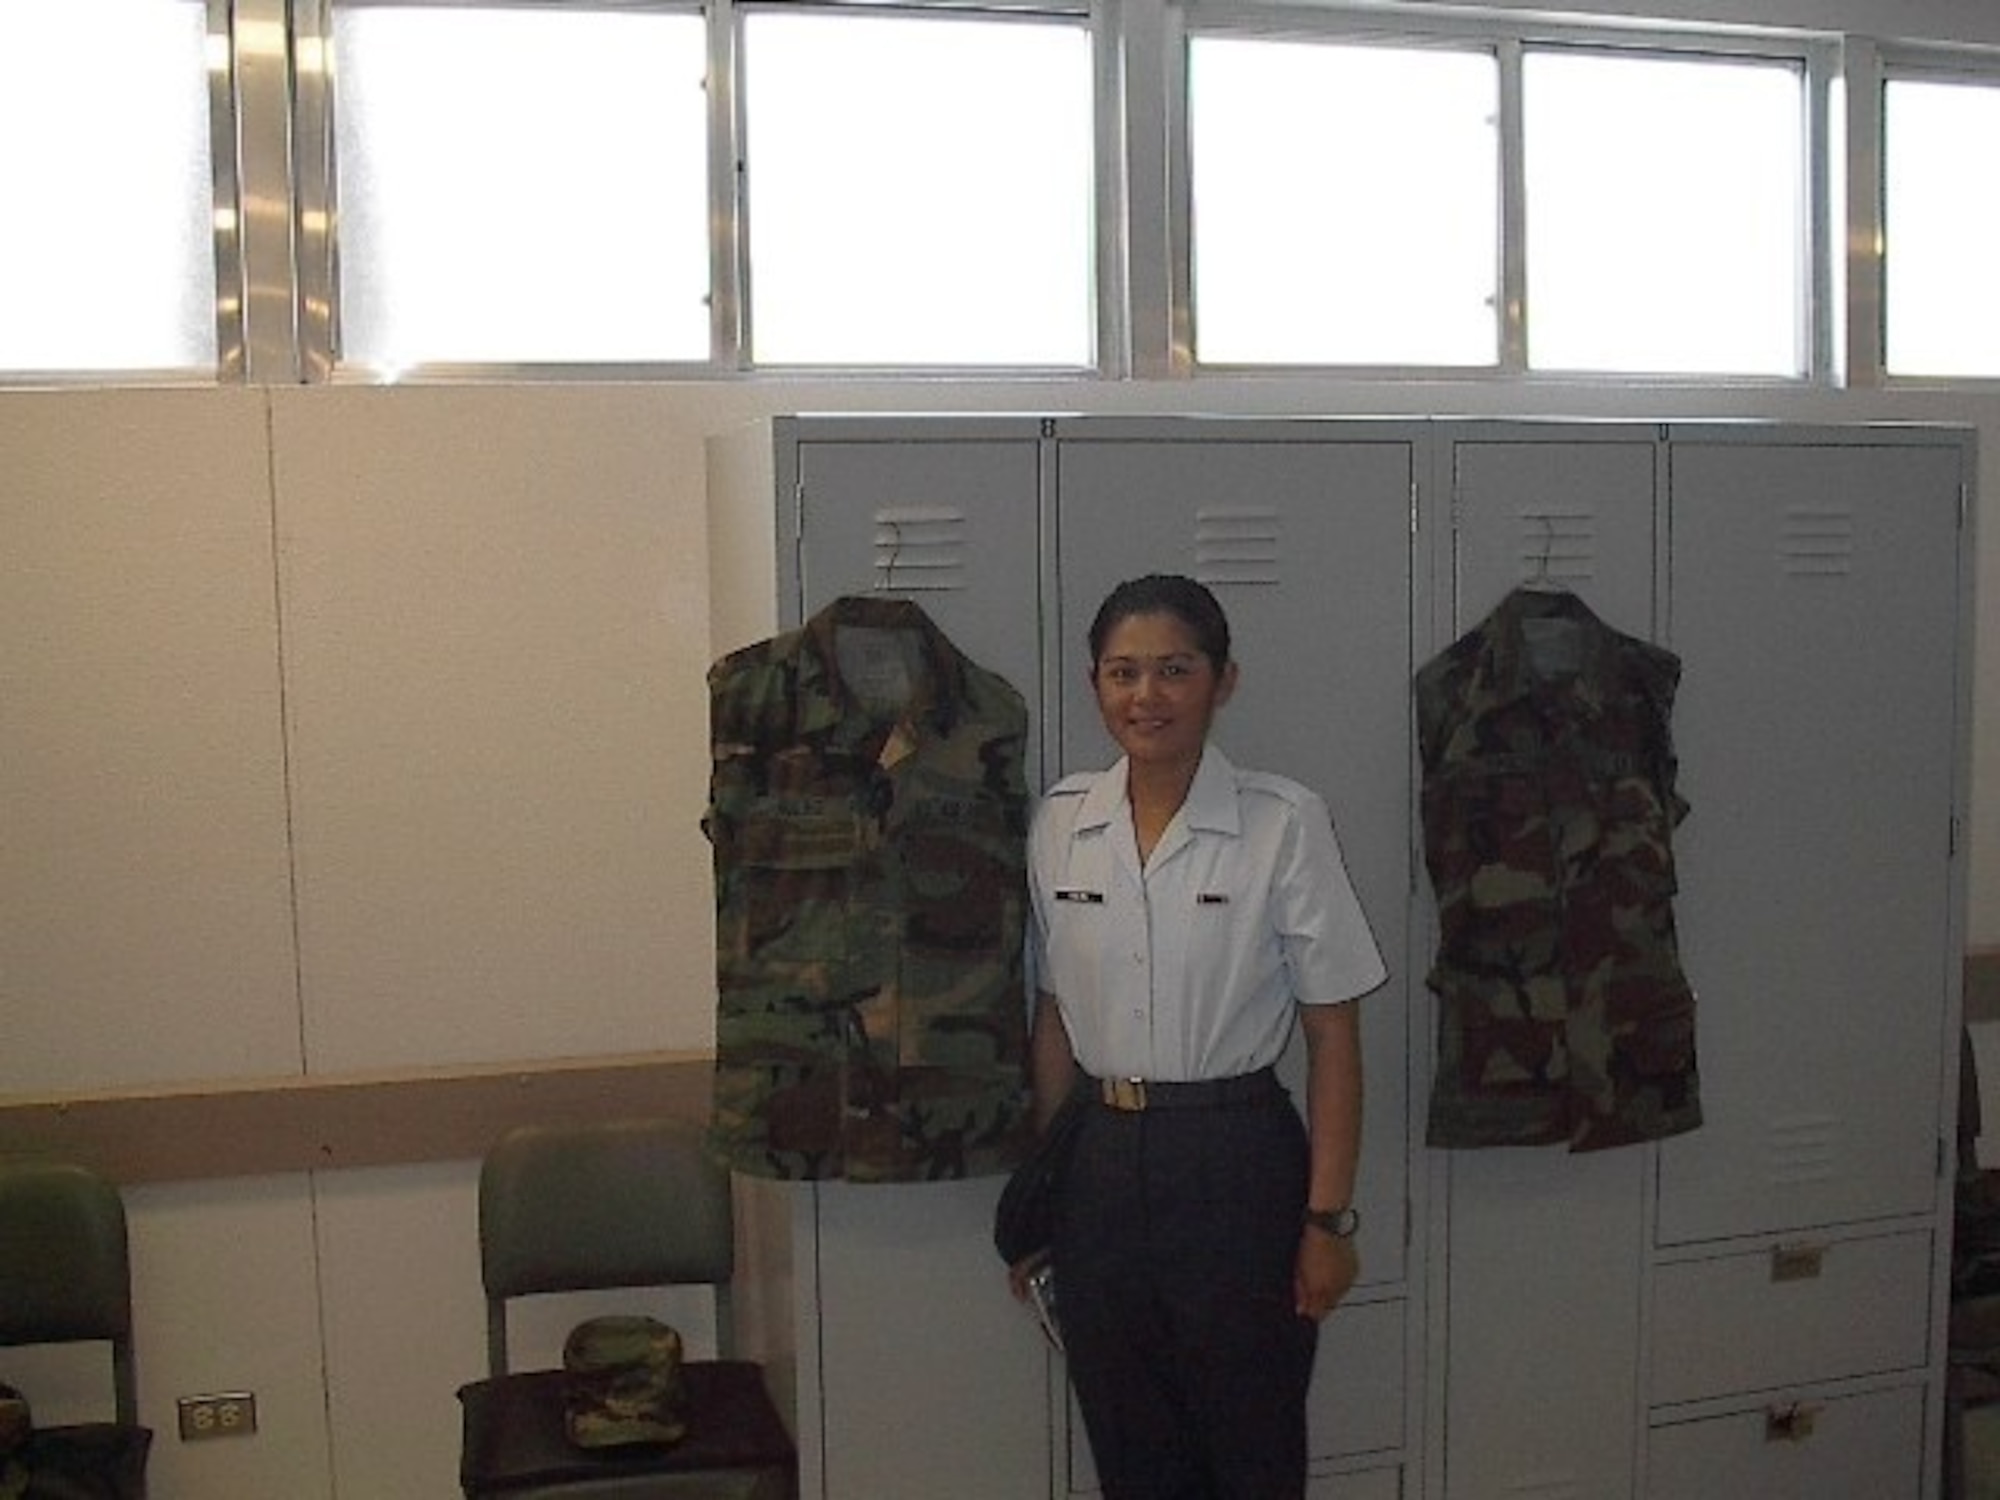 Master Sgt. Kanya Briner poses in front of her wall locker after graduating from Basic Military Training in 2001.  Briner decided to join the Air Force Reserve after her husband was killed in a landslide in 1999. (Courtesy Photo)